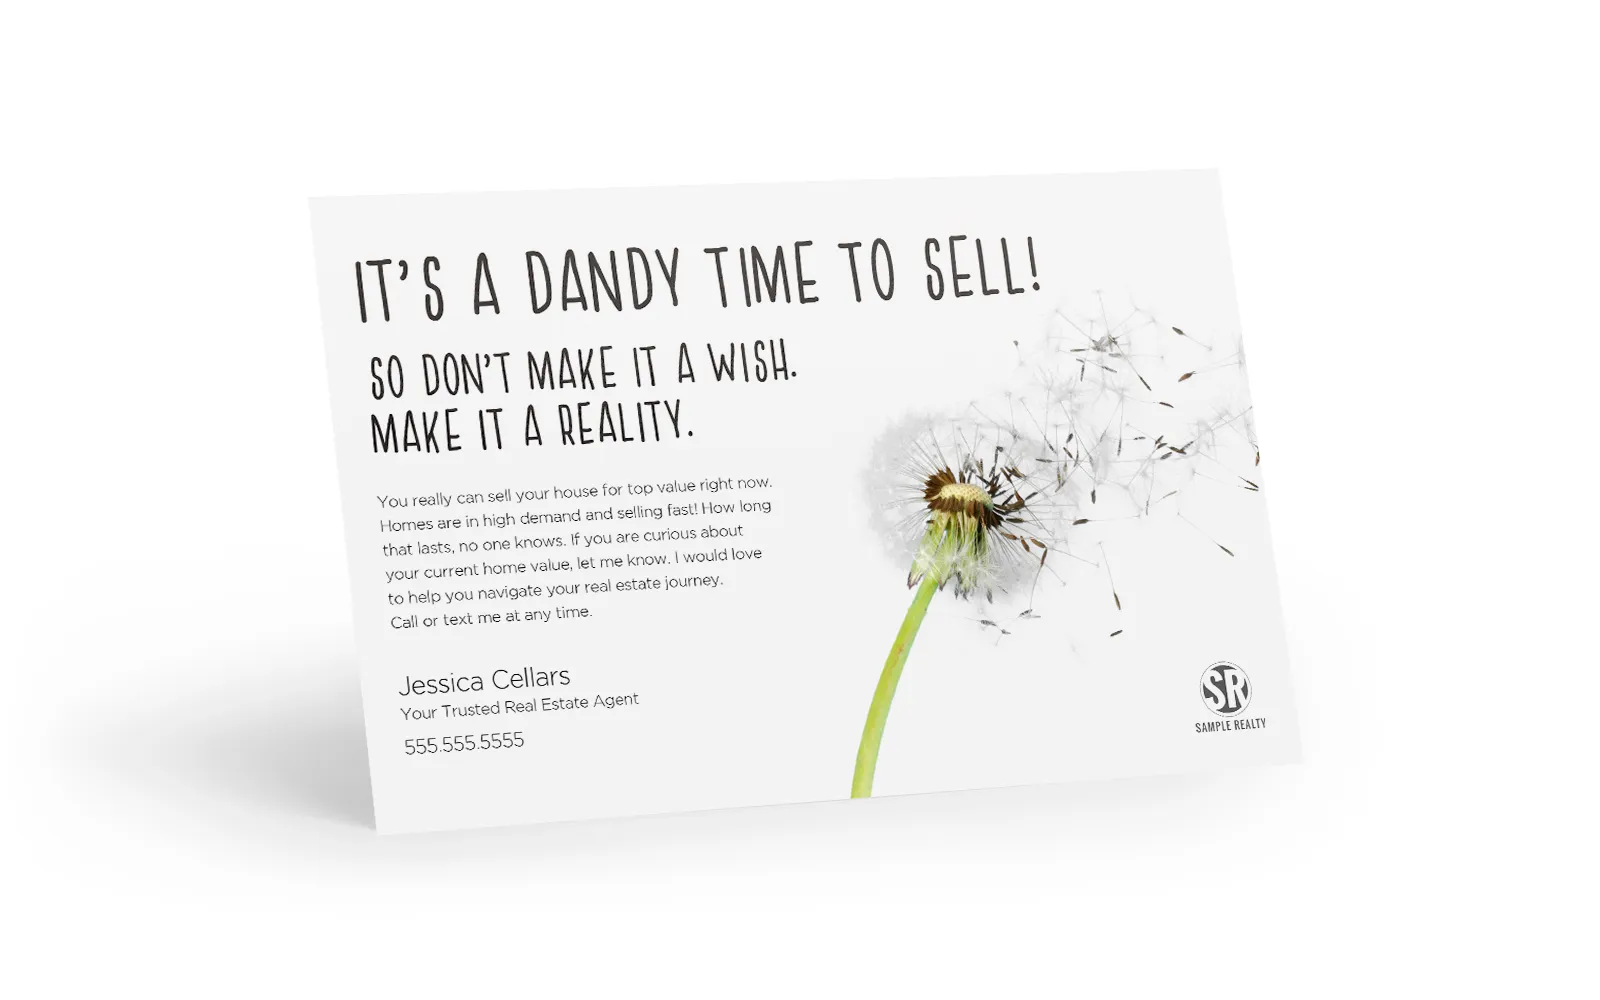 Bright Side Postcard - Dandy Time To Sell